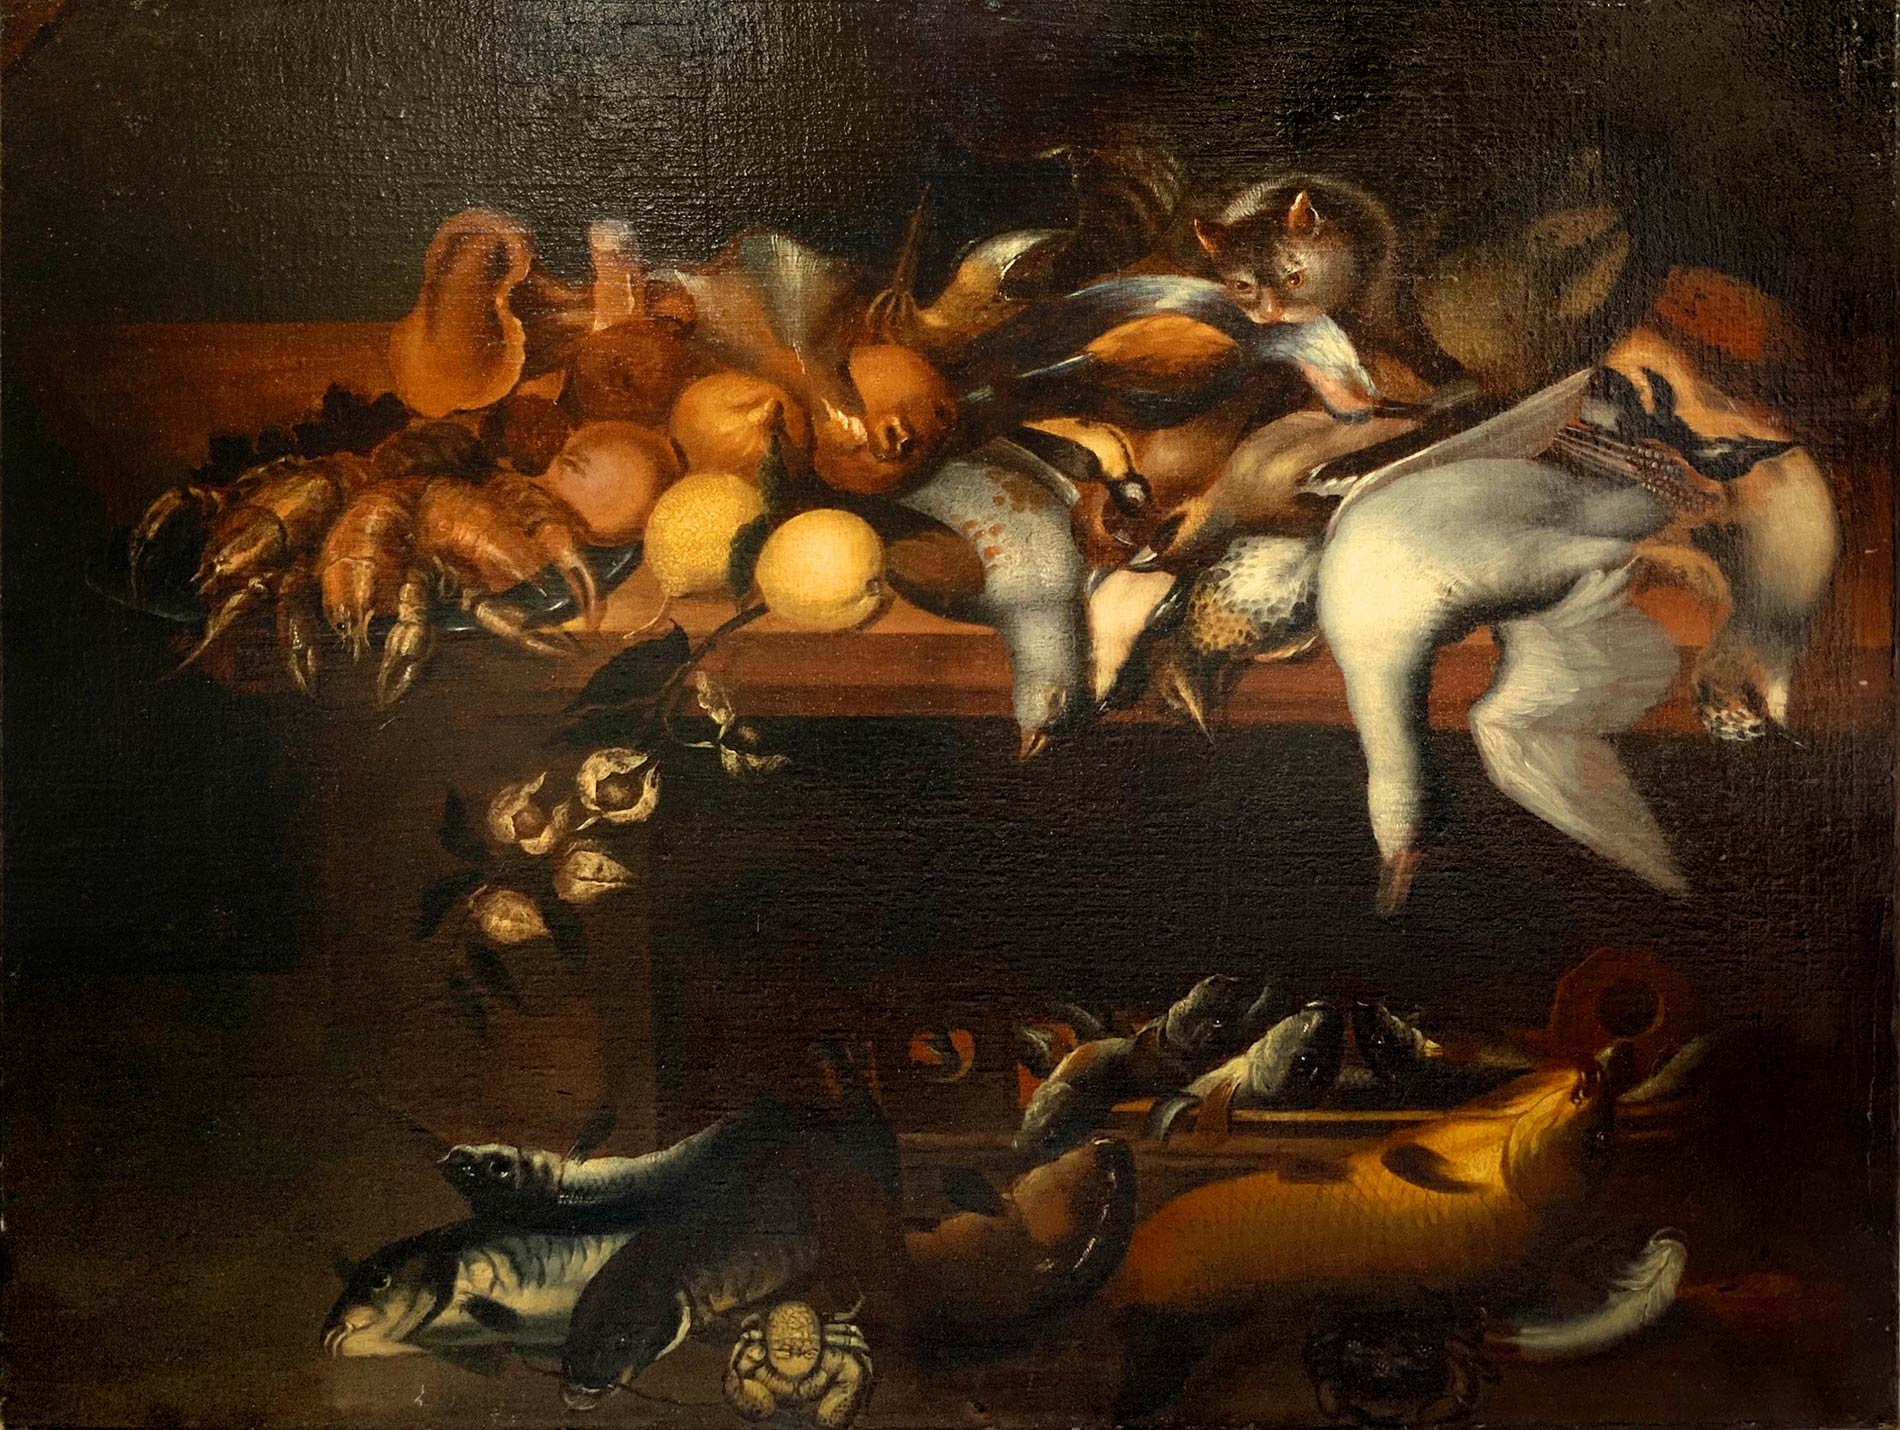 instans Generator Jeg spiser morgenmad Frans Snyders | Still life with game, fish, fruit and a cat | MutualArt